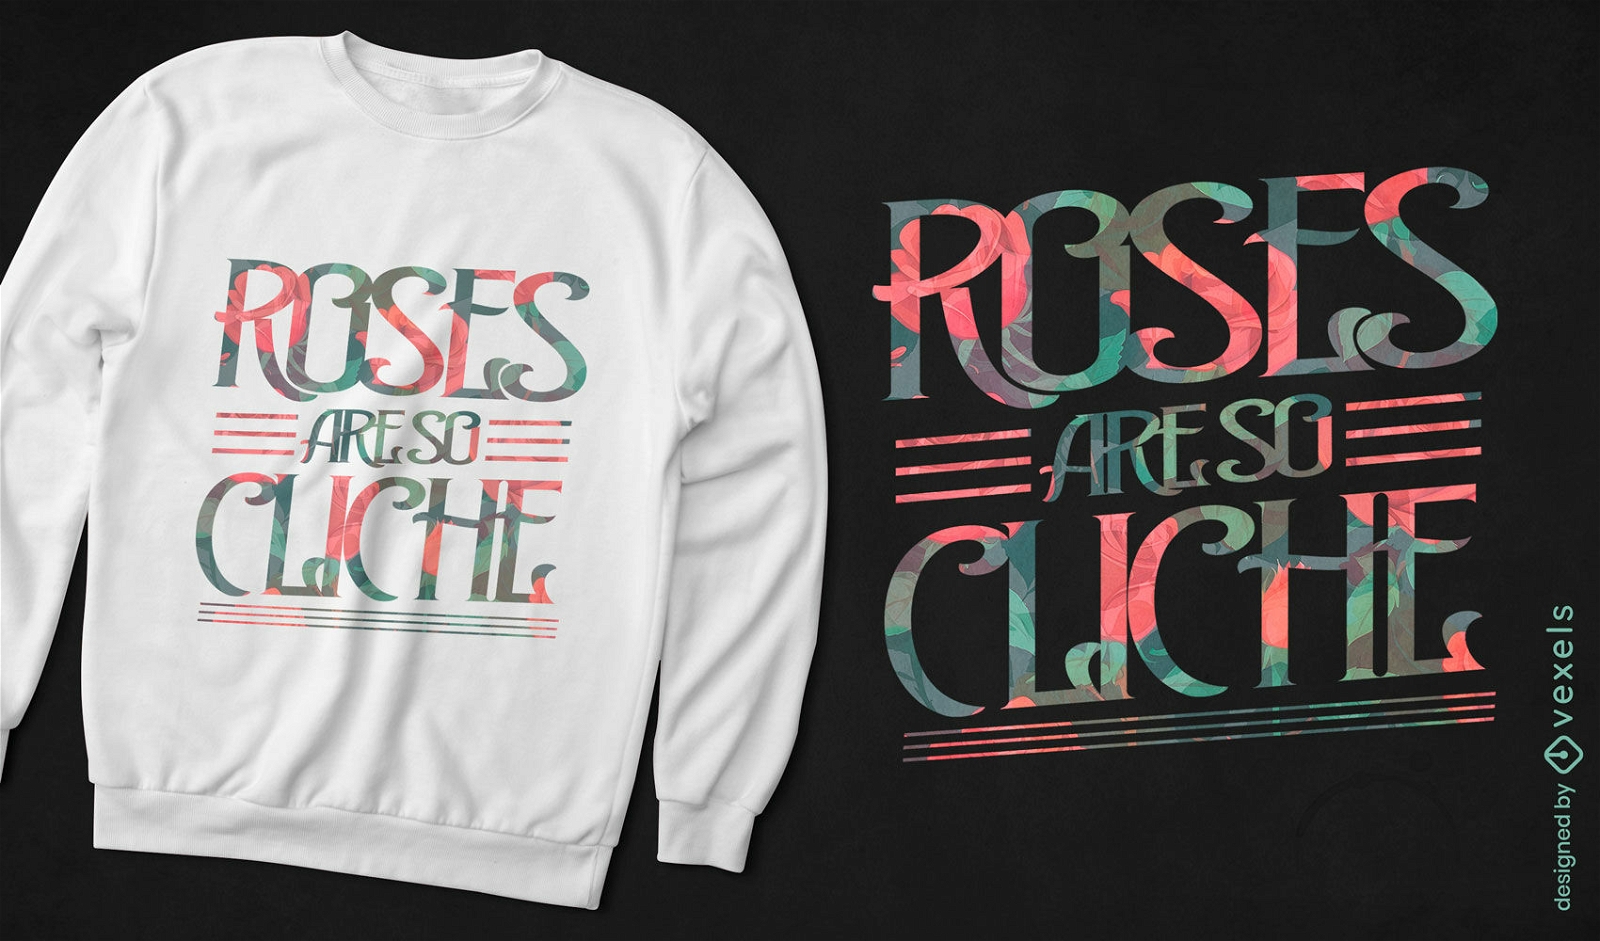 Roses clich? quote t-shirt design